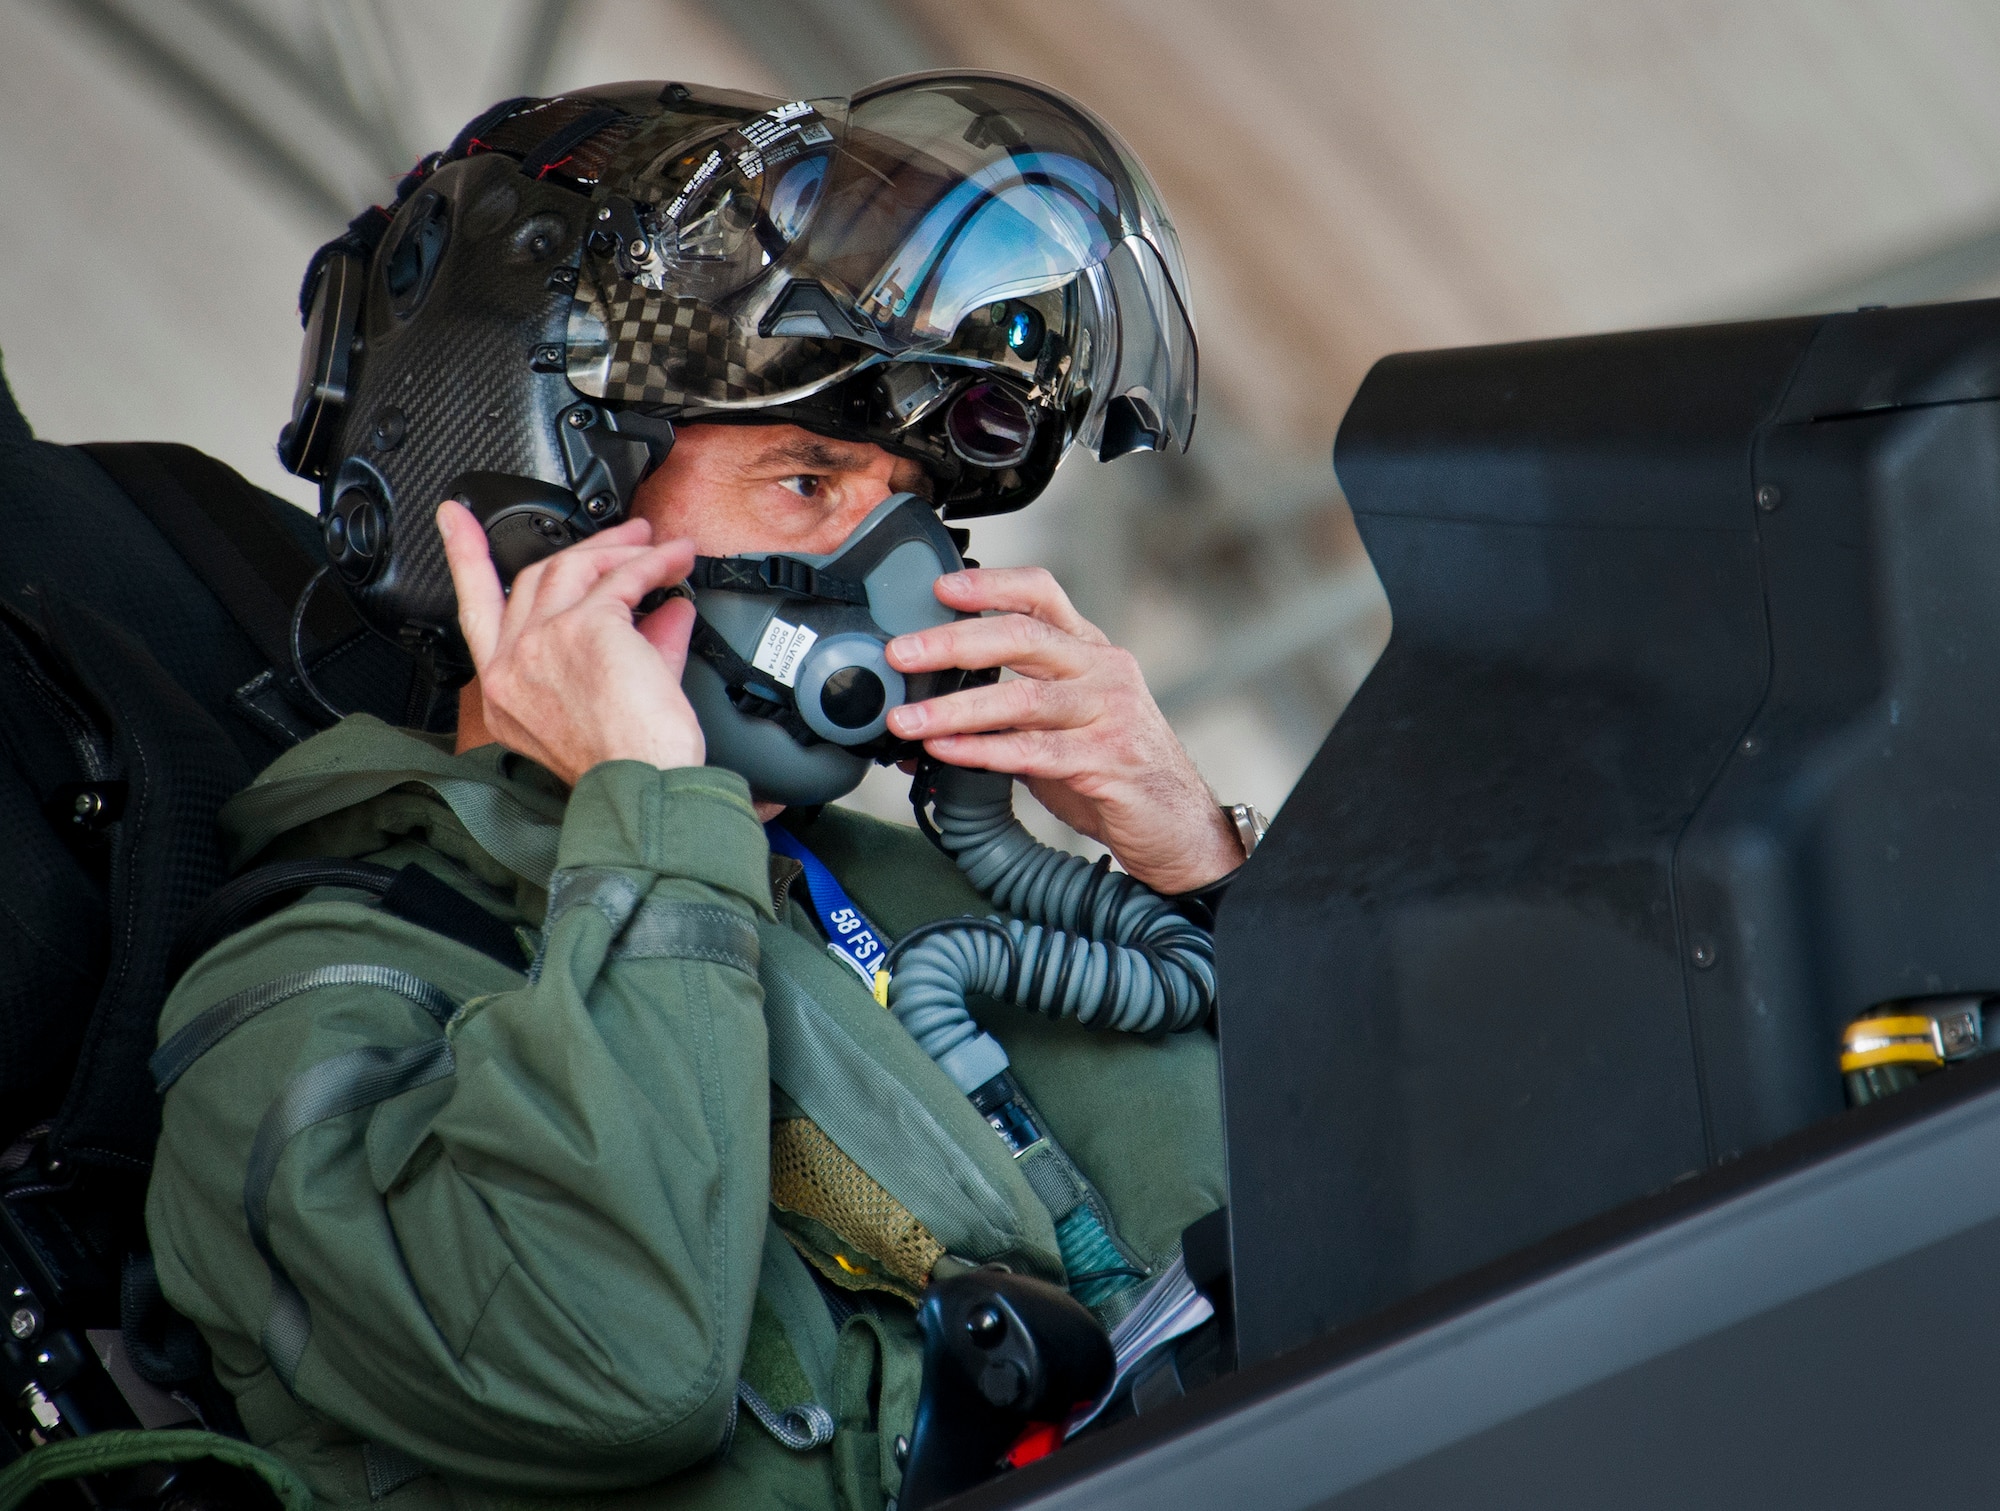 Maj. Gen. Jay Silveria, U. S. Air Force Warfare Center commander, connects his oxygen mask prior to his final qualifying flight in the F-35A Lightning II Sept. 26 at Eglin Air Force Base, Fla.  Silveria became the first general officer in the Department of Defense to qualify in the fifth generation fighter.  He completed his training with back-to-back flights and hot pit refueling.  (U.S. Air Force photo/Samuel King Jr.)